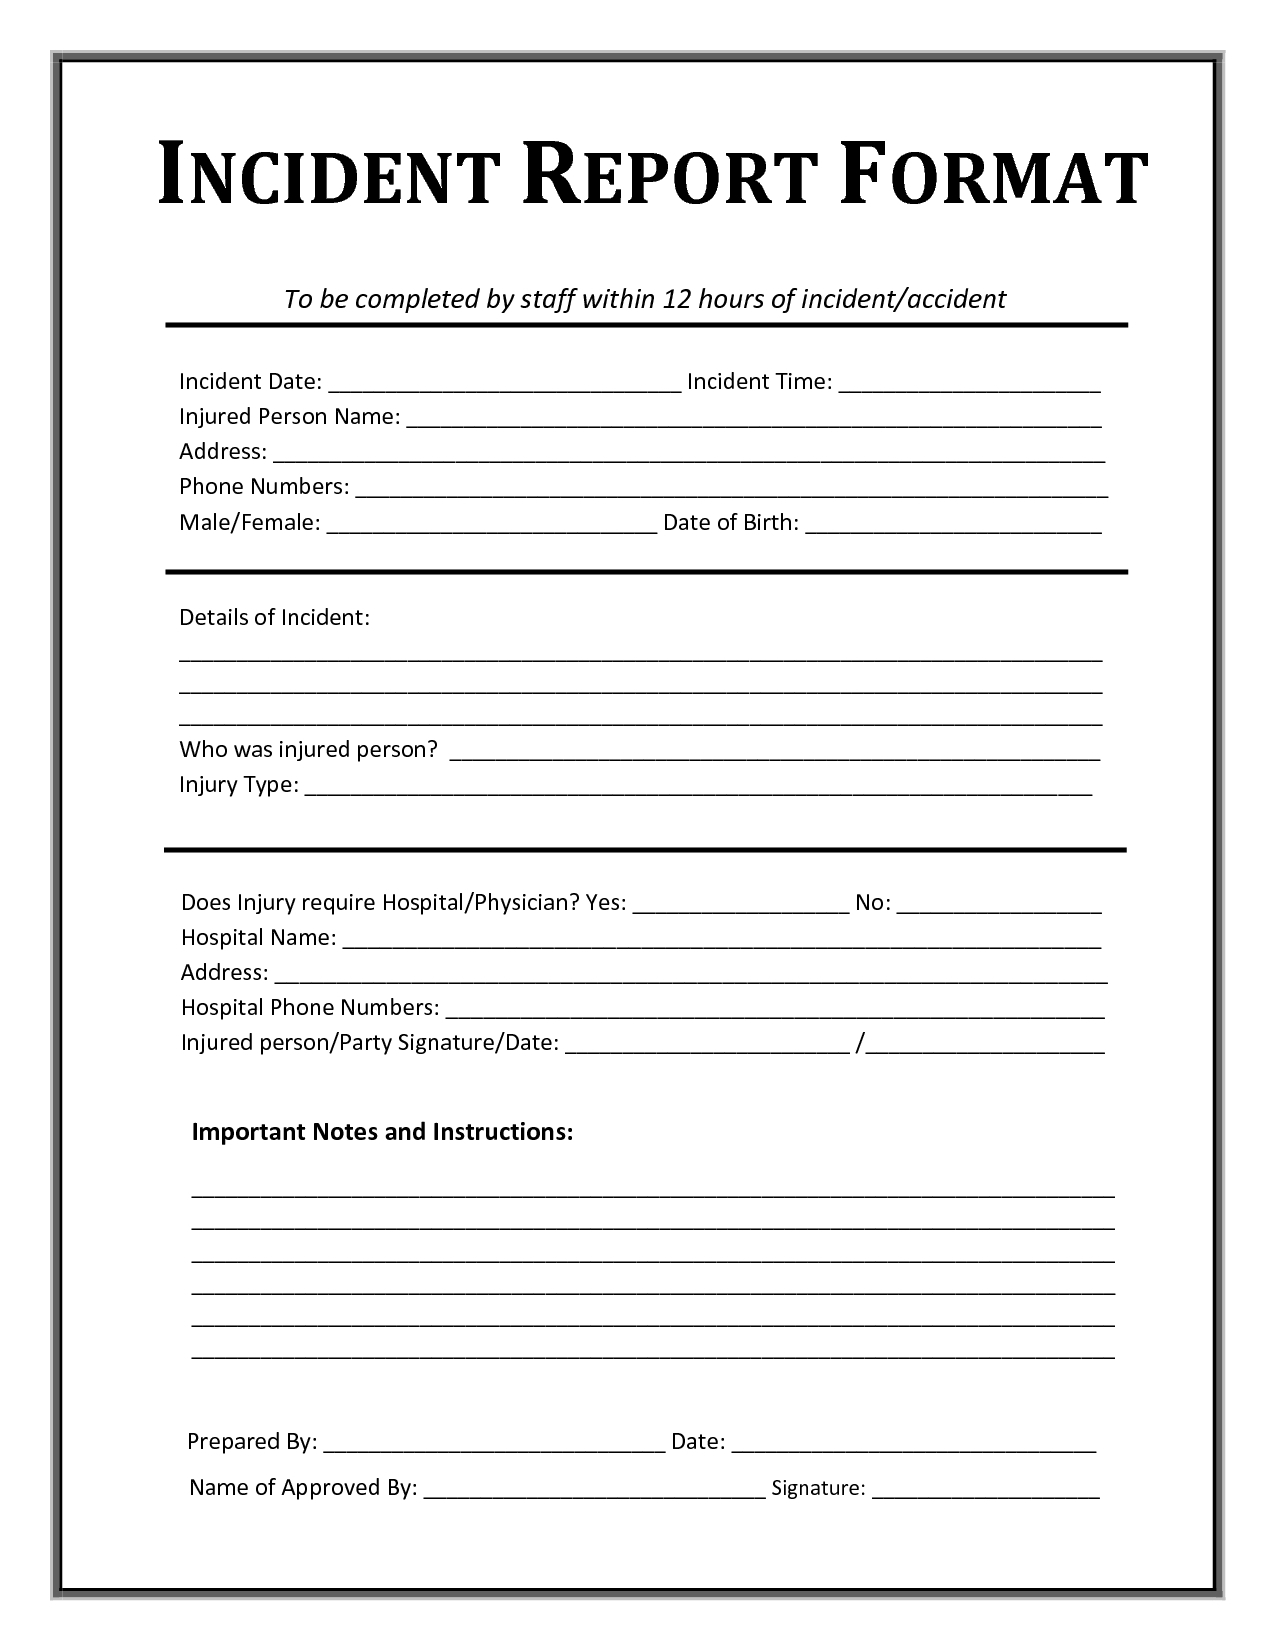 Incident Report Form Template Microsoft Excel | Report Pertaining To Vehicle Accident Report Form Template